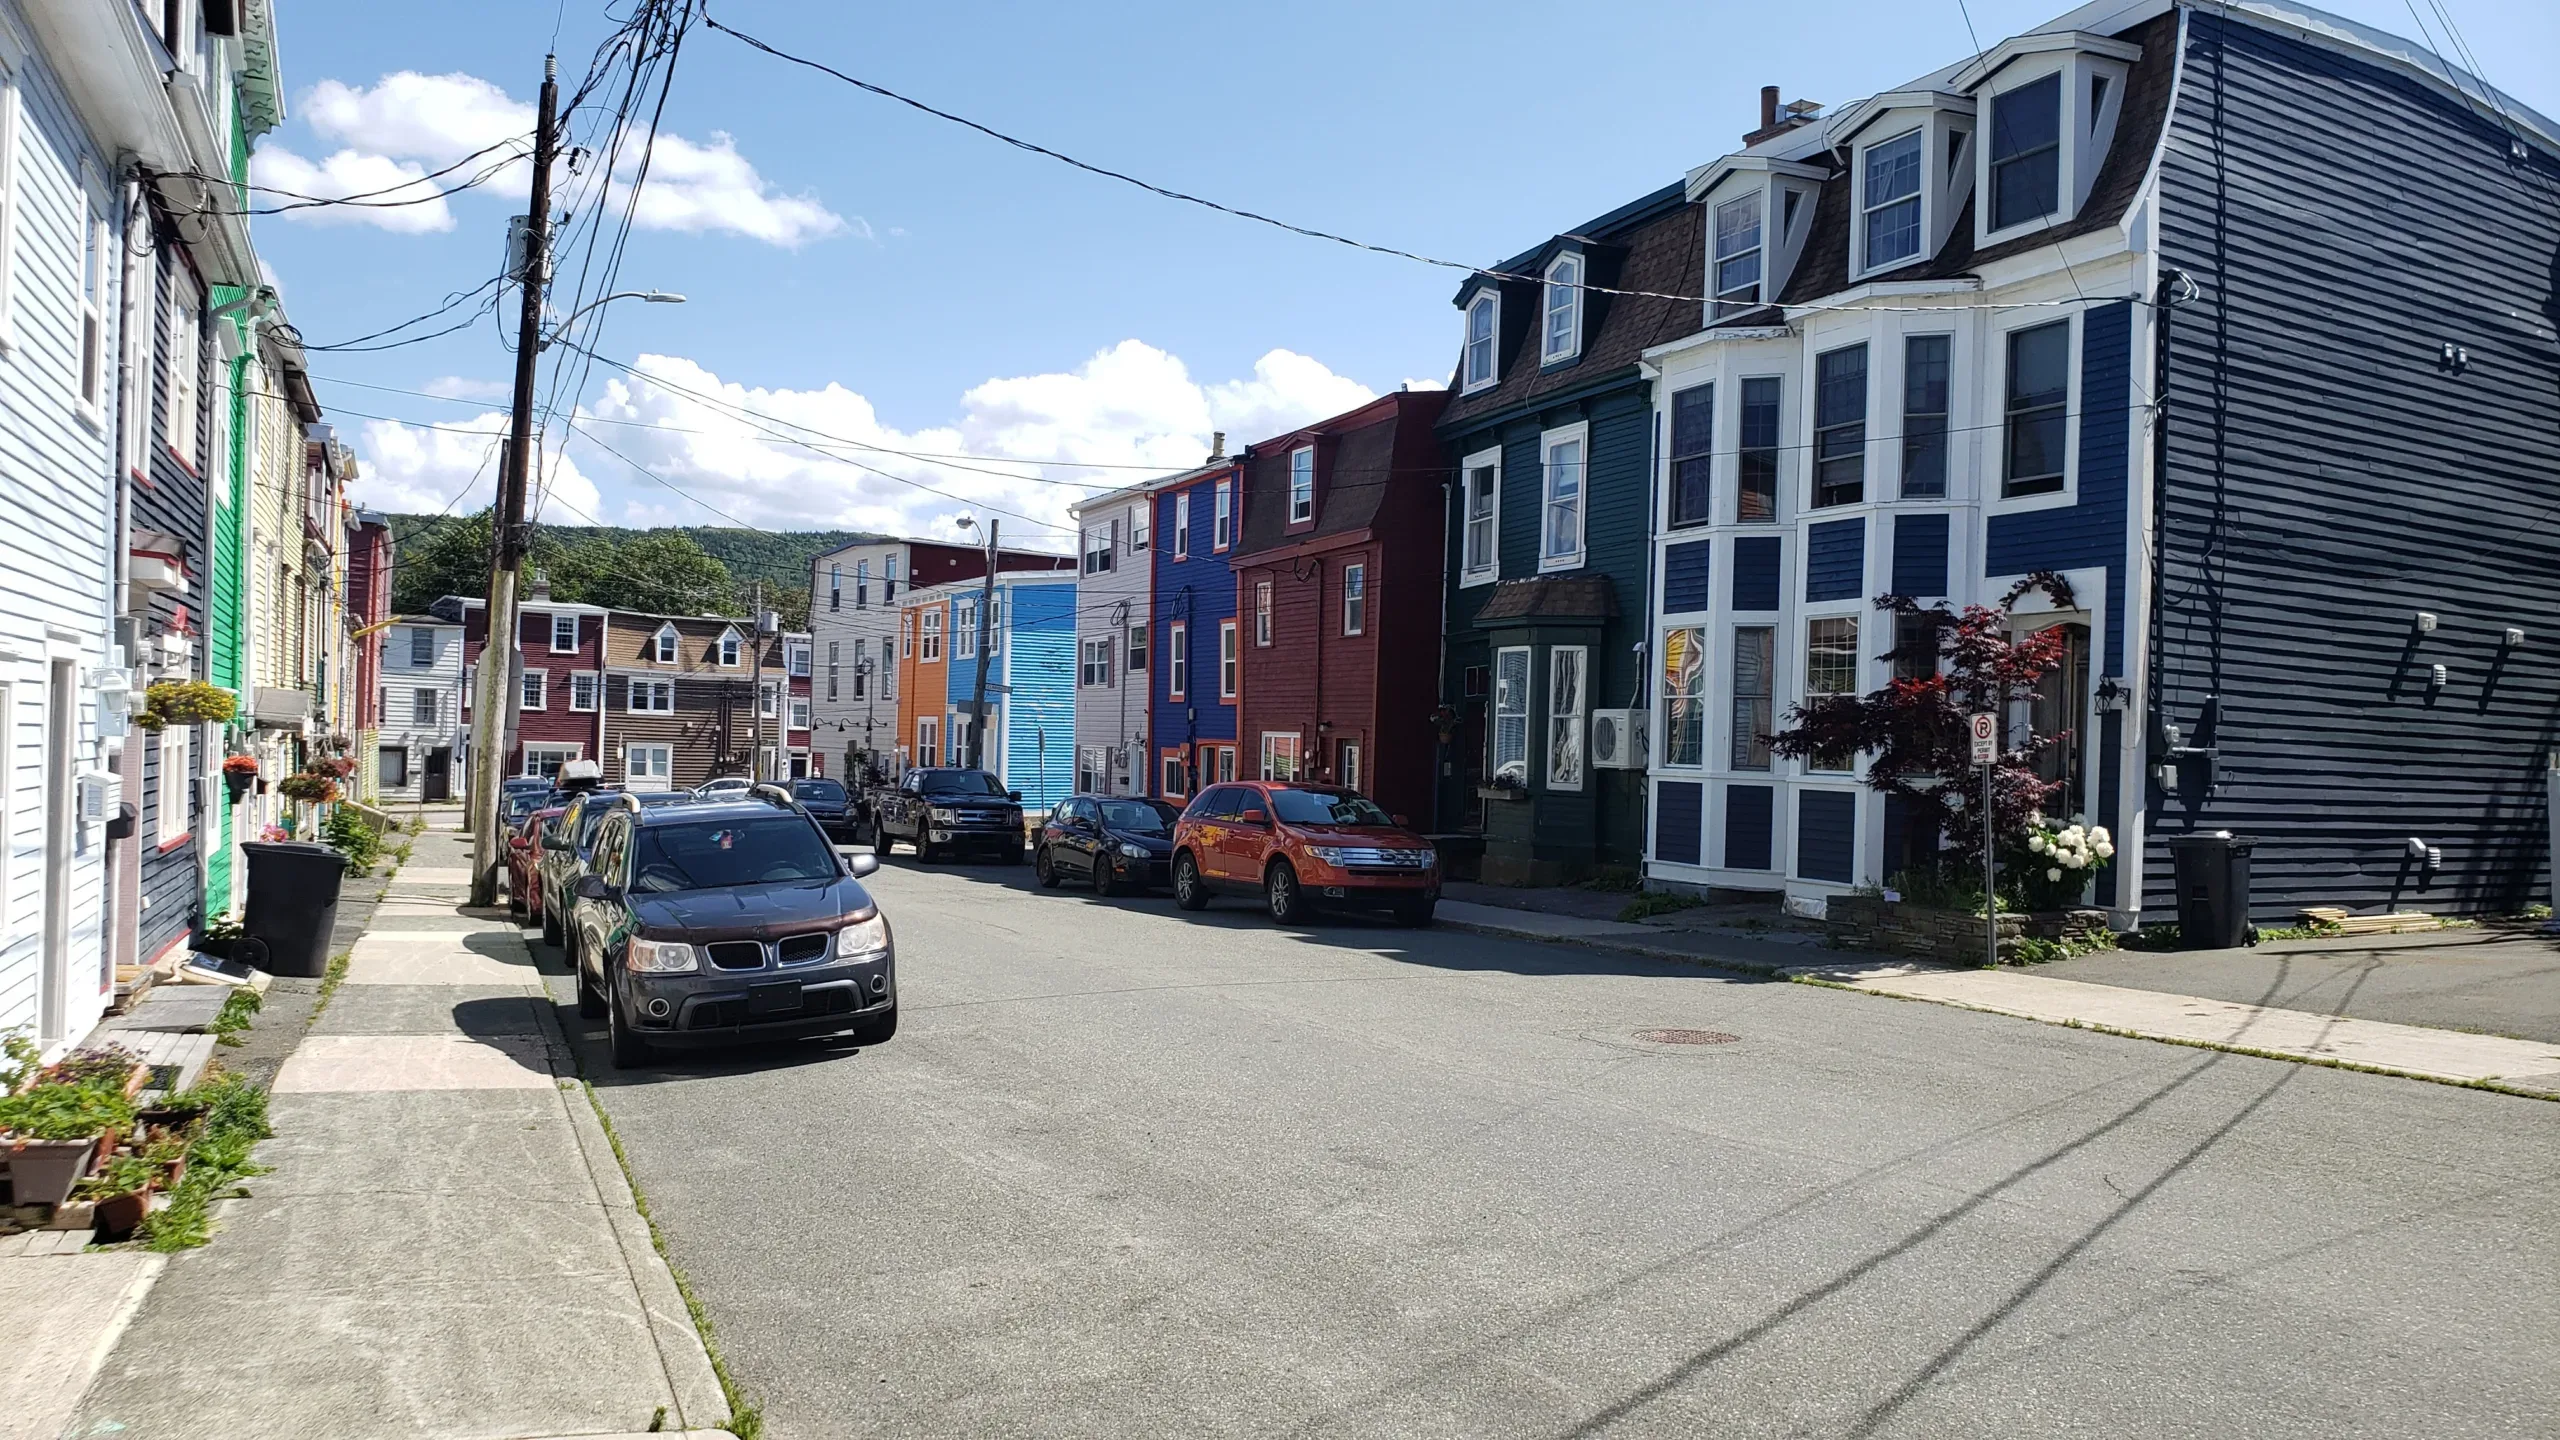 These are 19 Quirky and Unusual Things to Do in St John's. St. John's, is a charming and historic city on Canada's eastern coast.